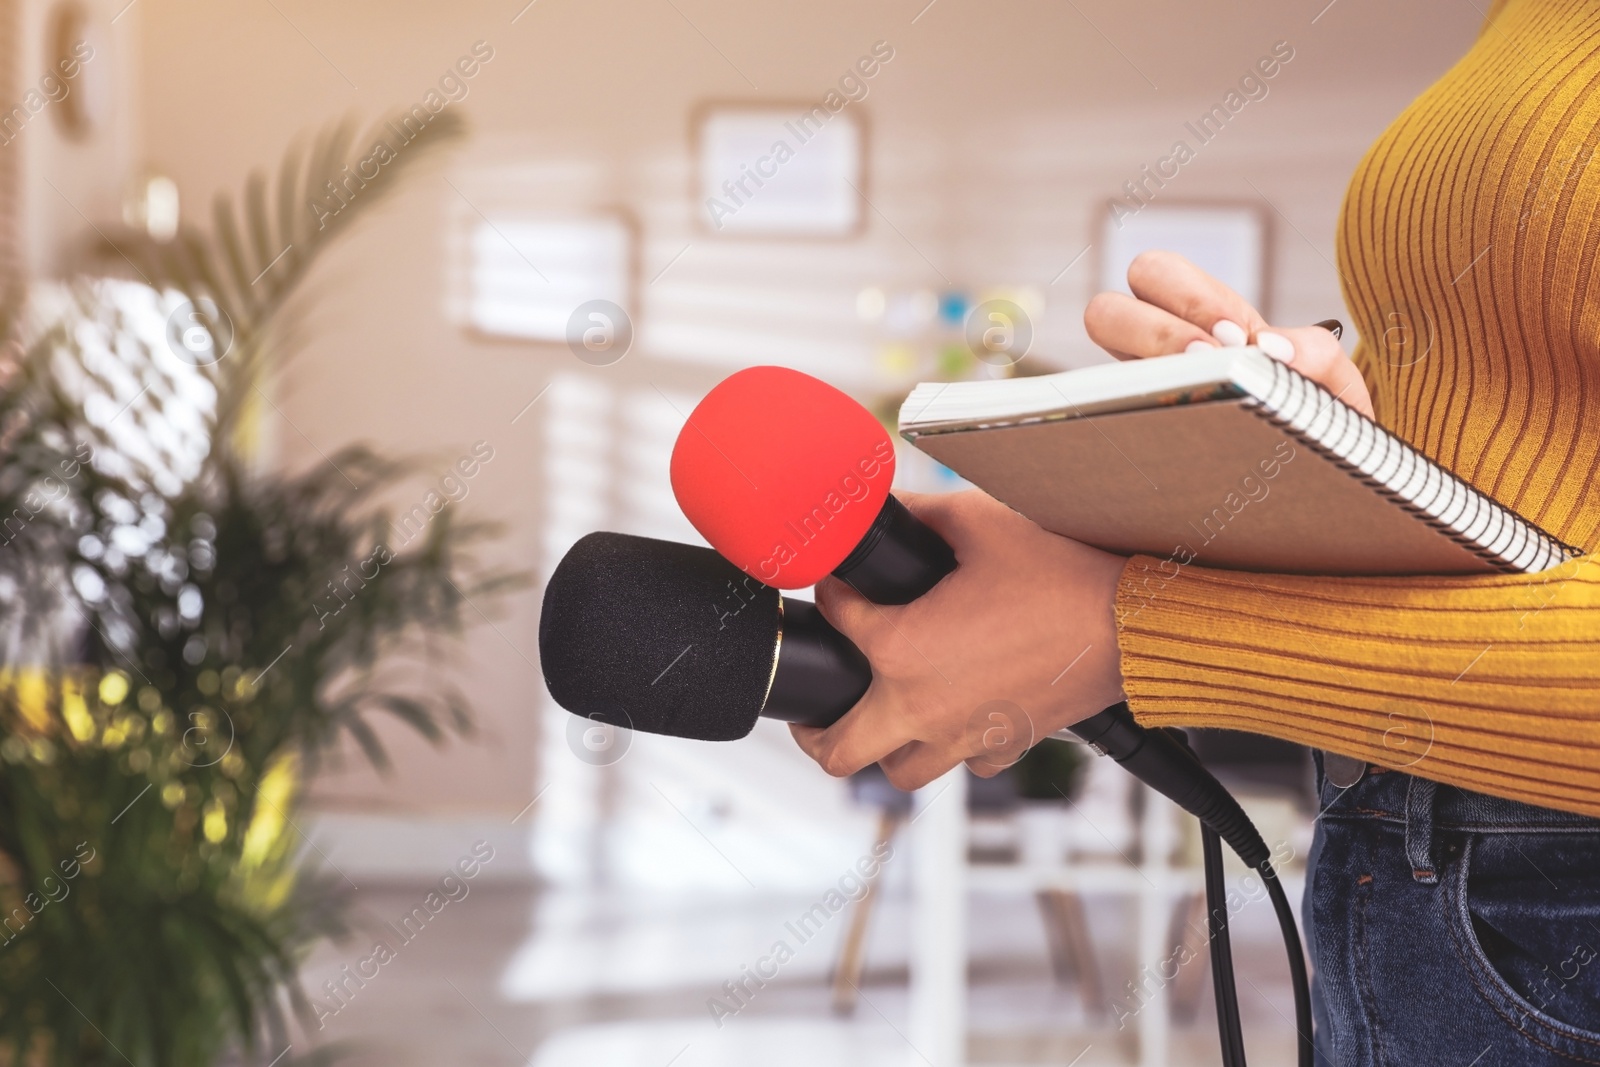 Image of Professional journalist with microphones taking notes indoors, closeup